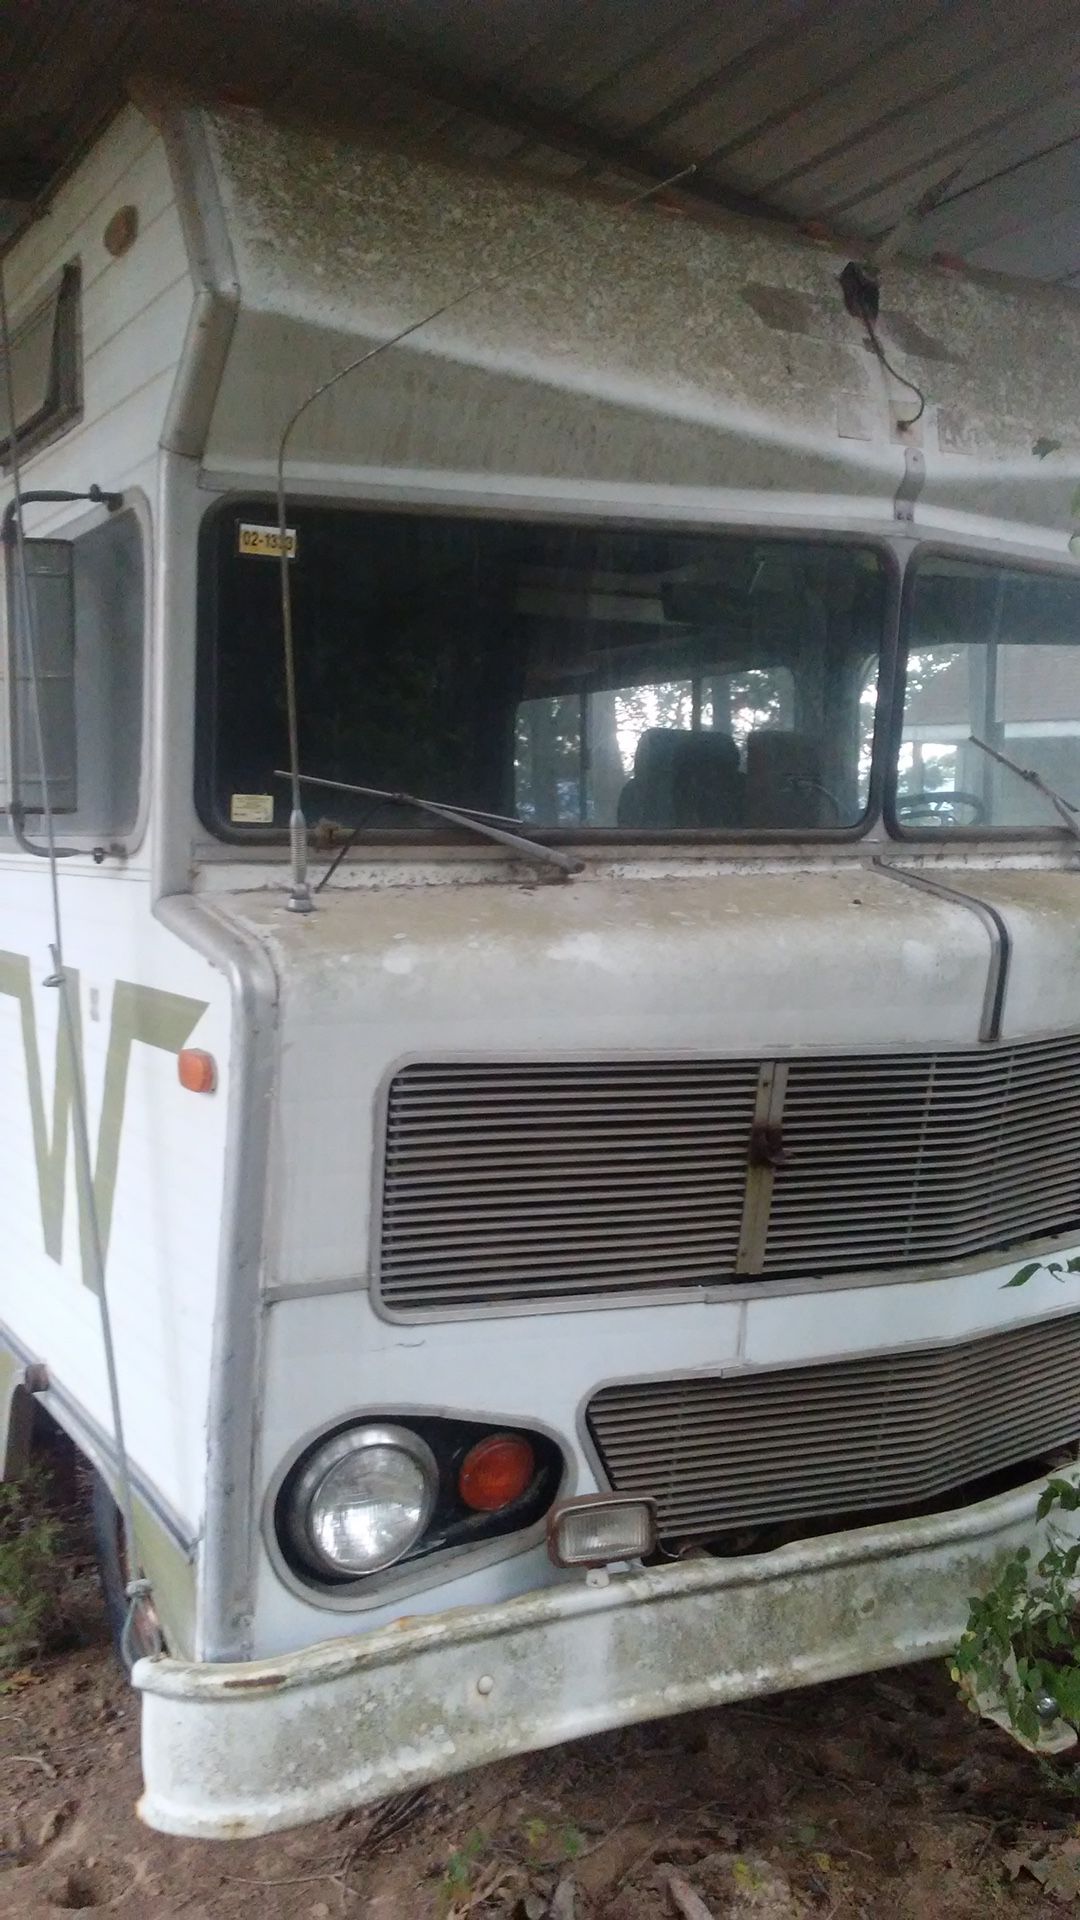 72 Winnebago Indian all original plus rv awning 18x30 foot. Rv is ready for restoration it’s all there like you stepped back in time. Grandpa drive i